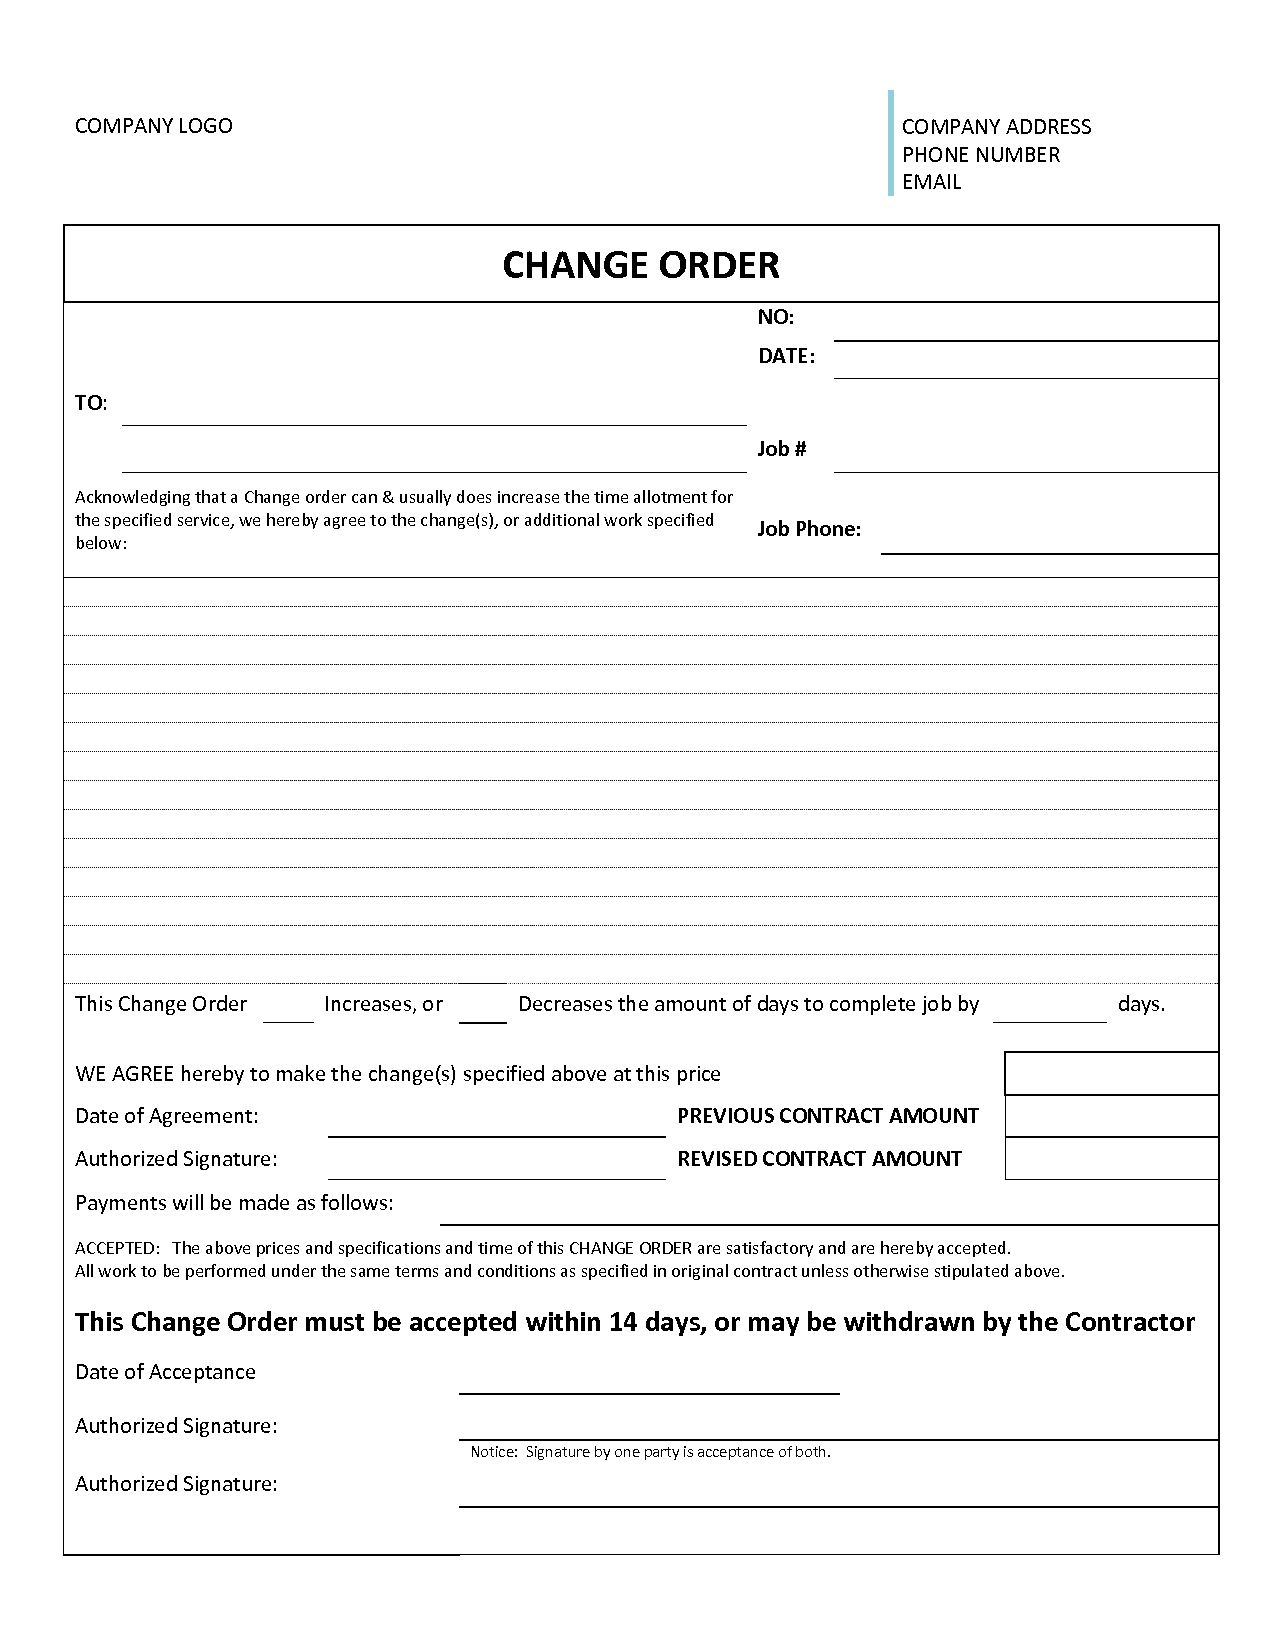 Change Order Templates Find Word Templates